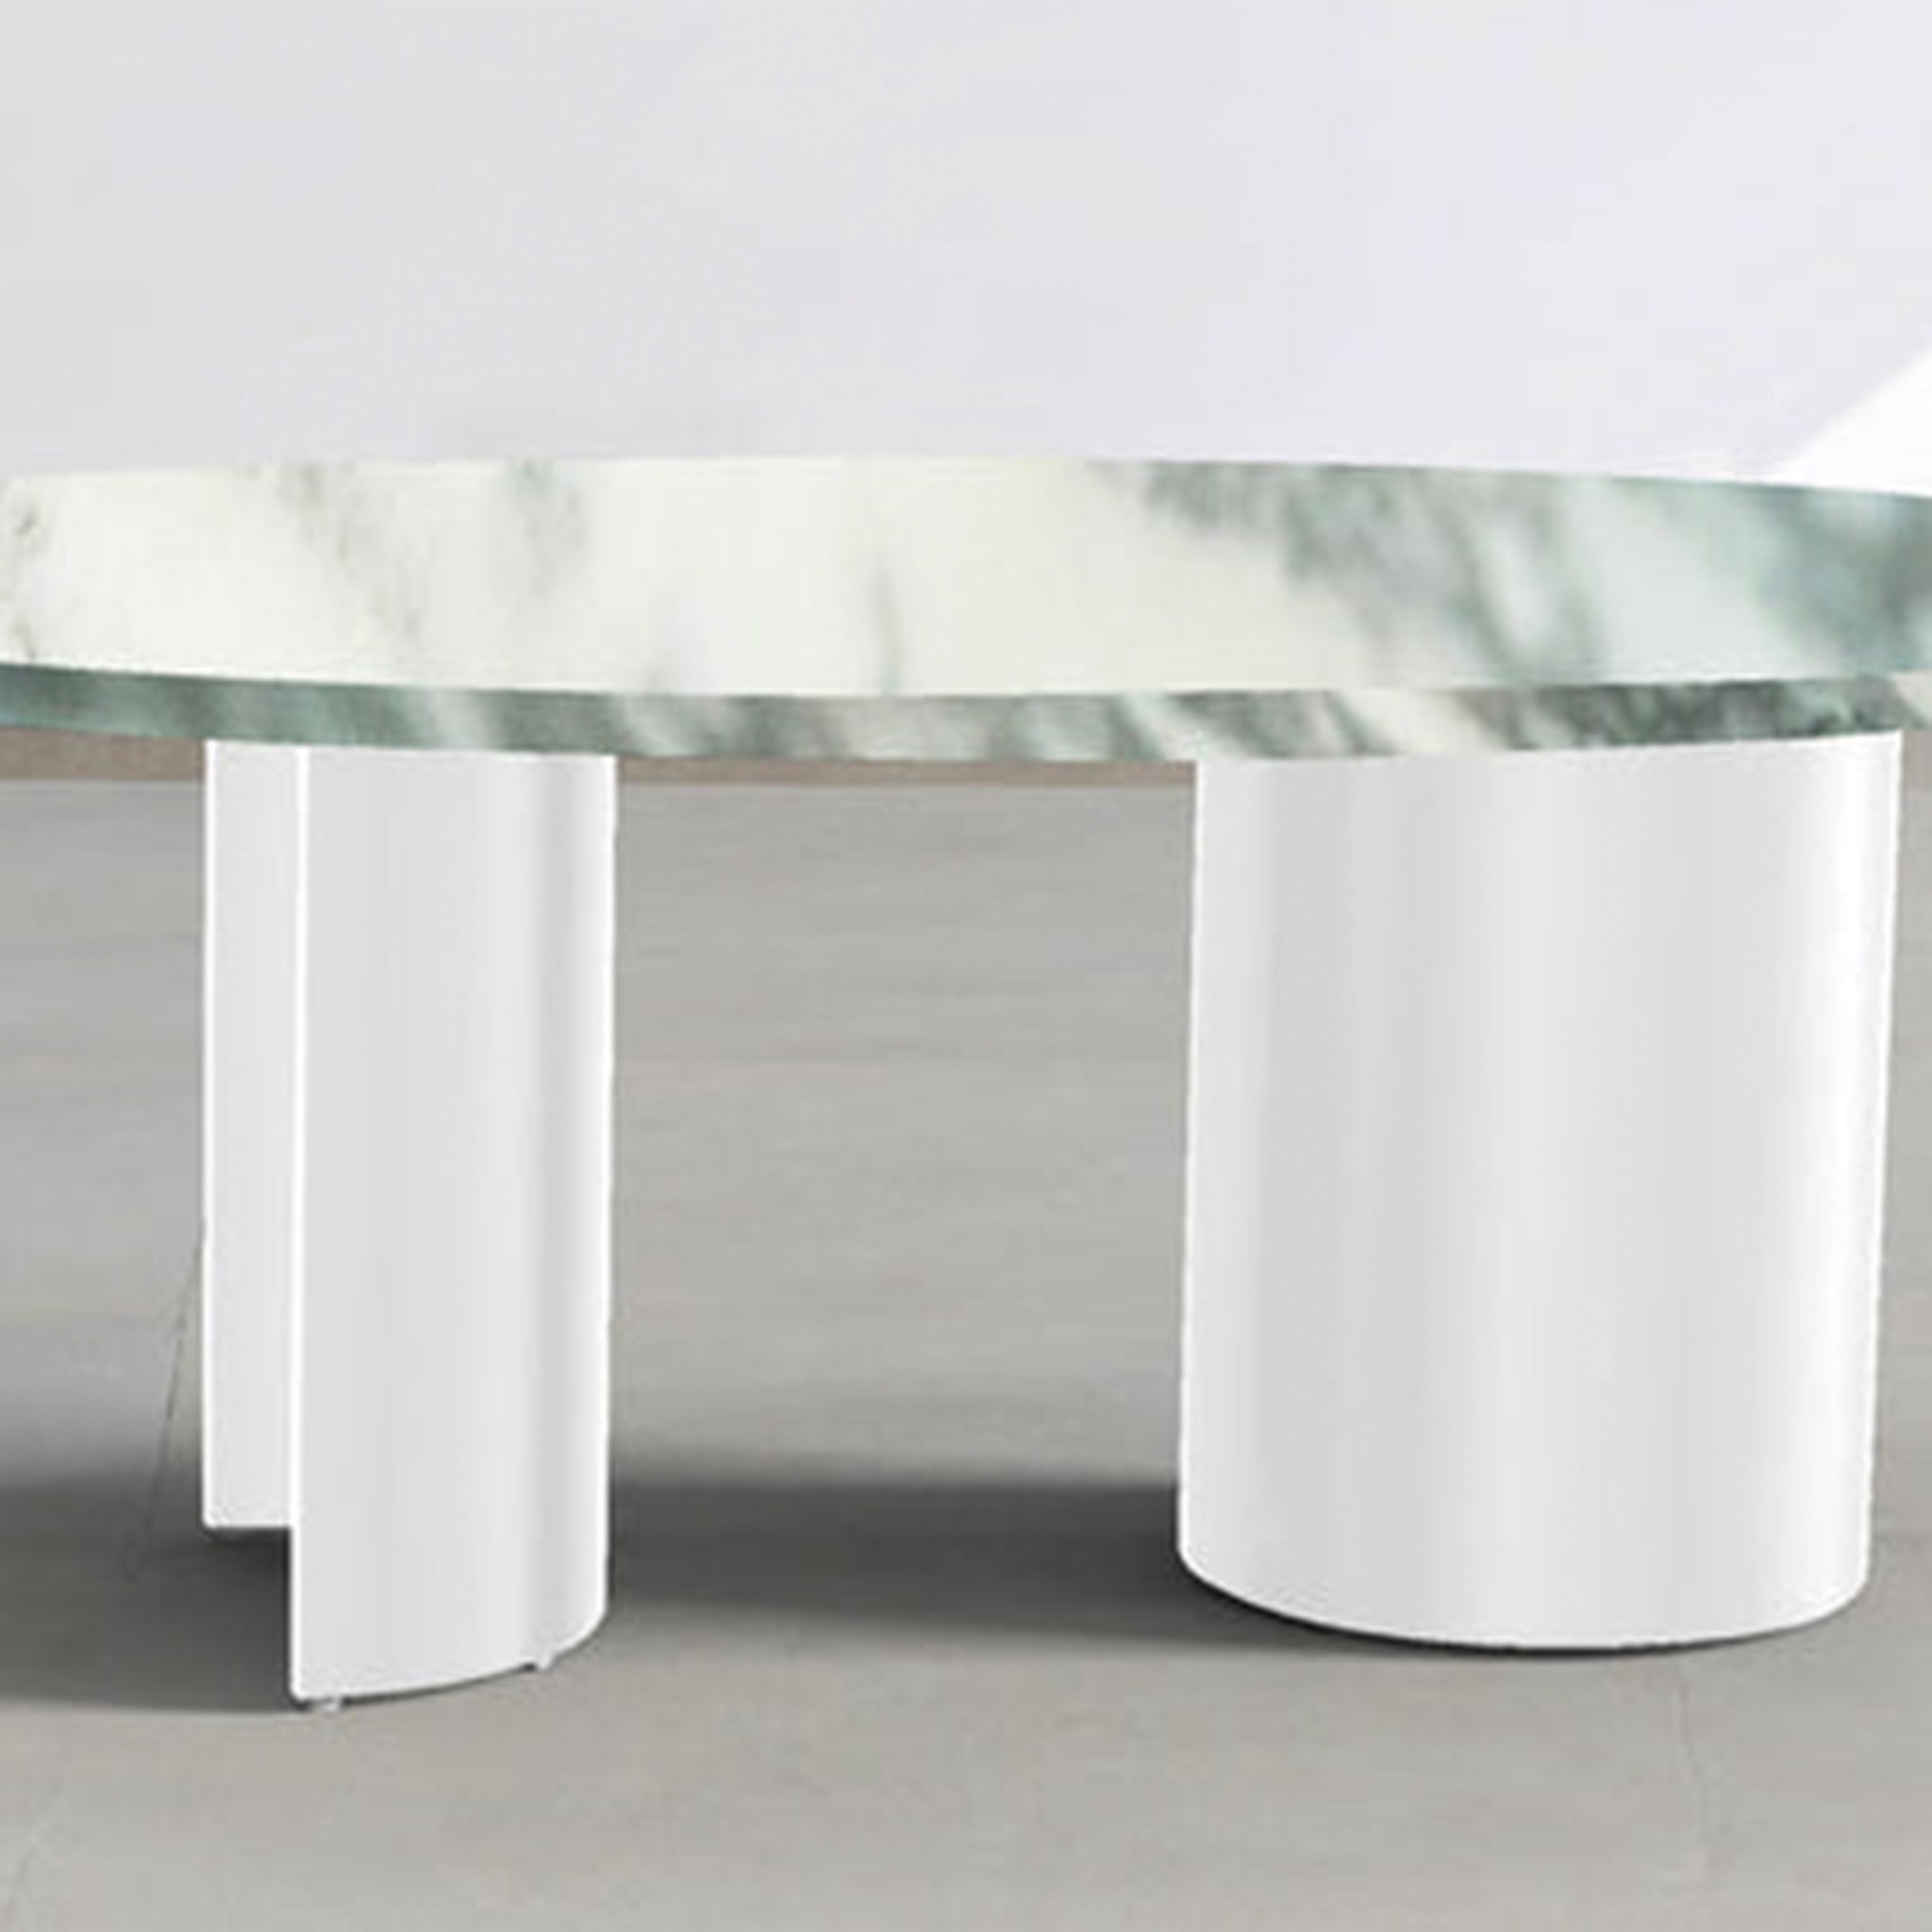 Coffee Table with Edge Detail: 2cm thick edge adds a touch of modern design.